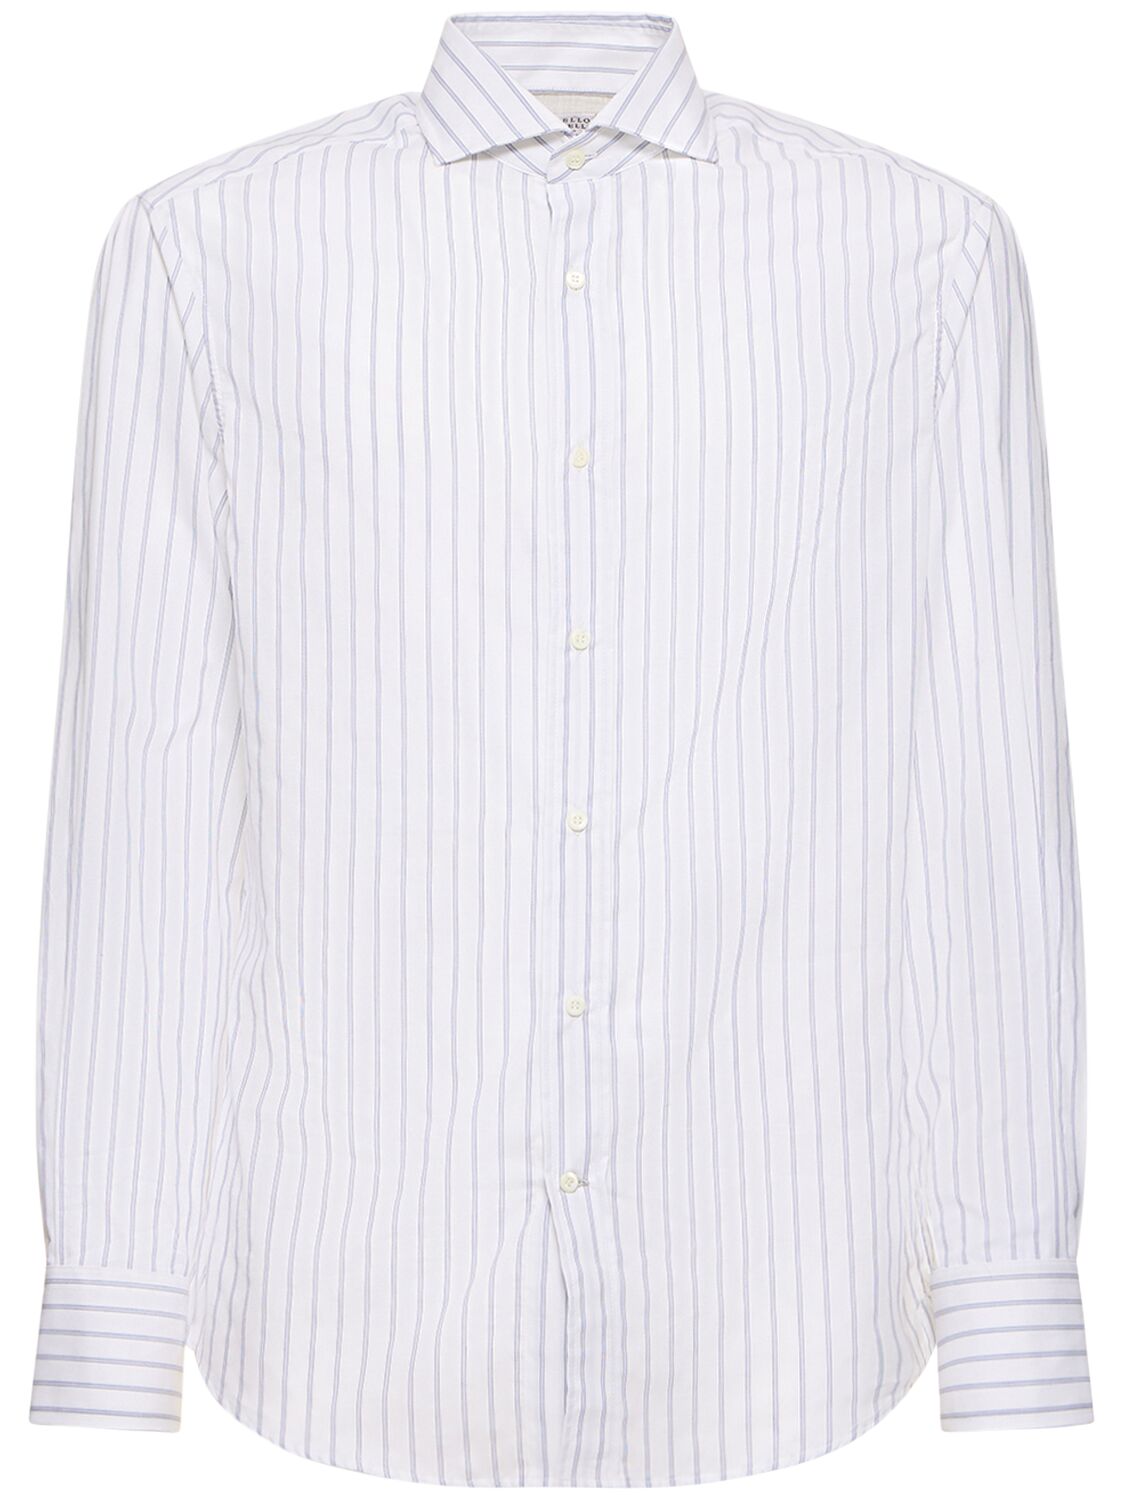 Image of Striped Oxford Shirt